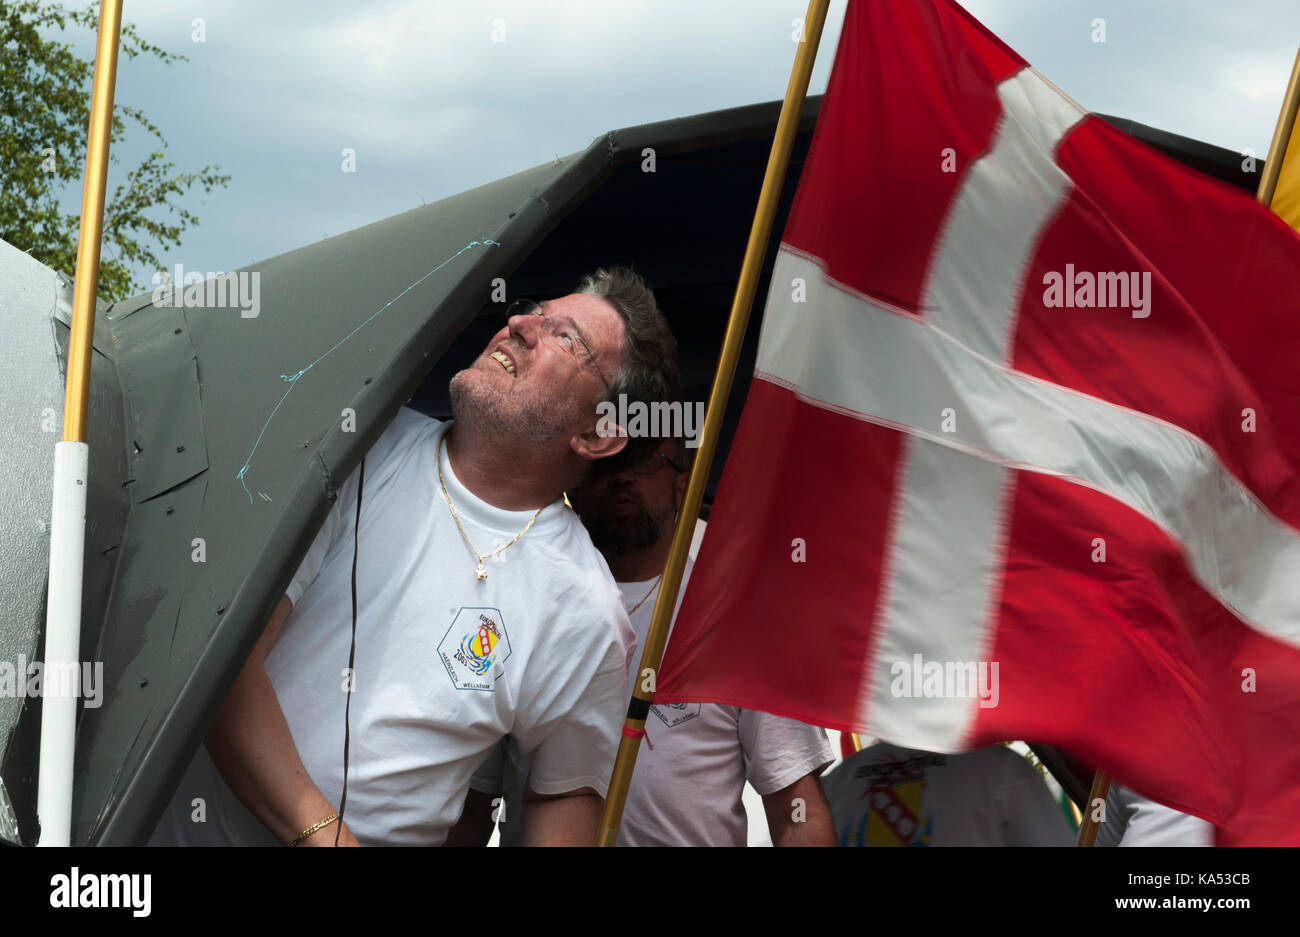 A man with the daska flag at the tent, Luxembourg. Stock Photo